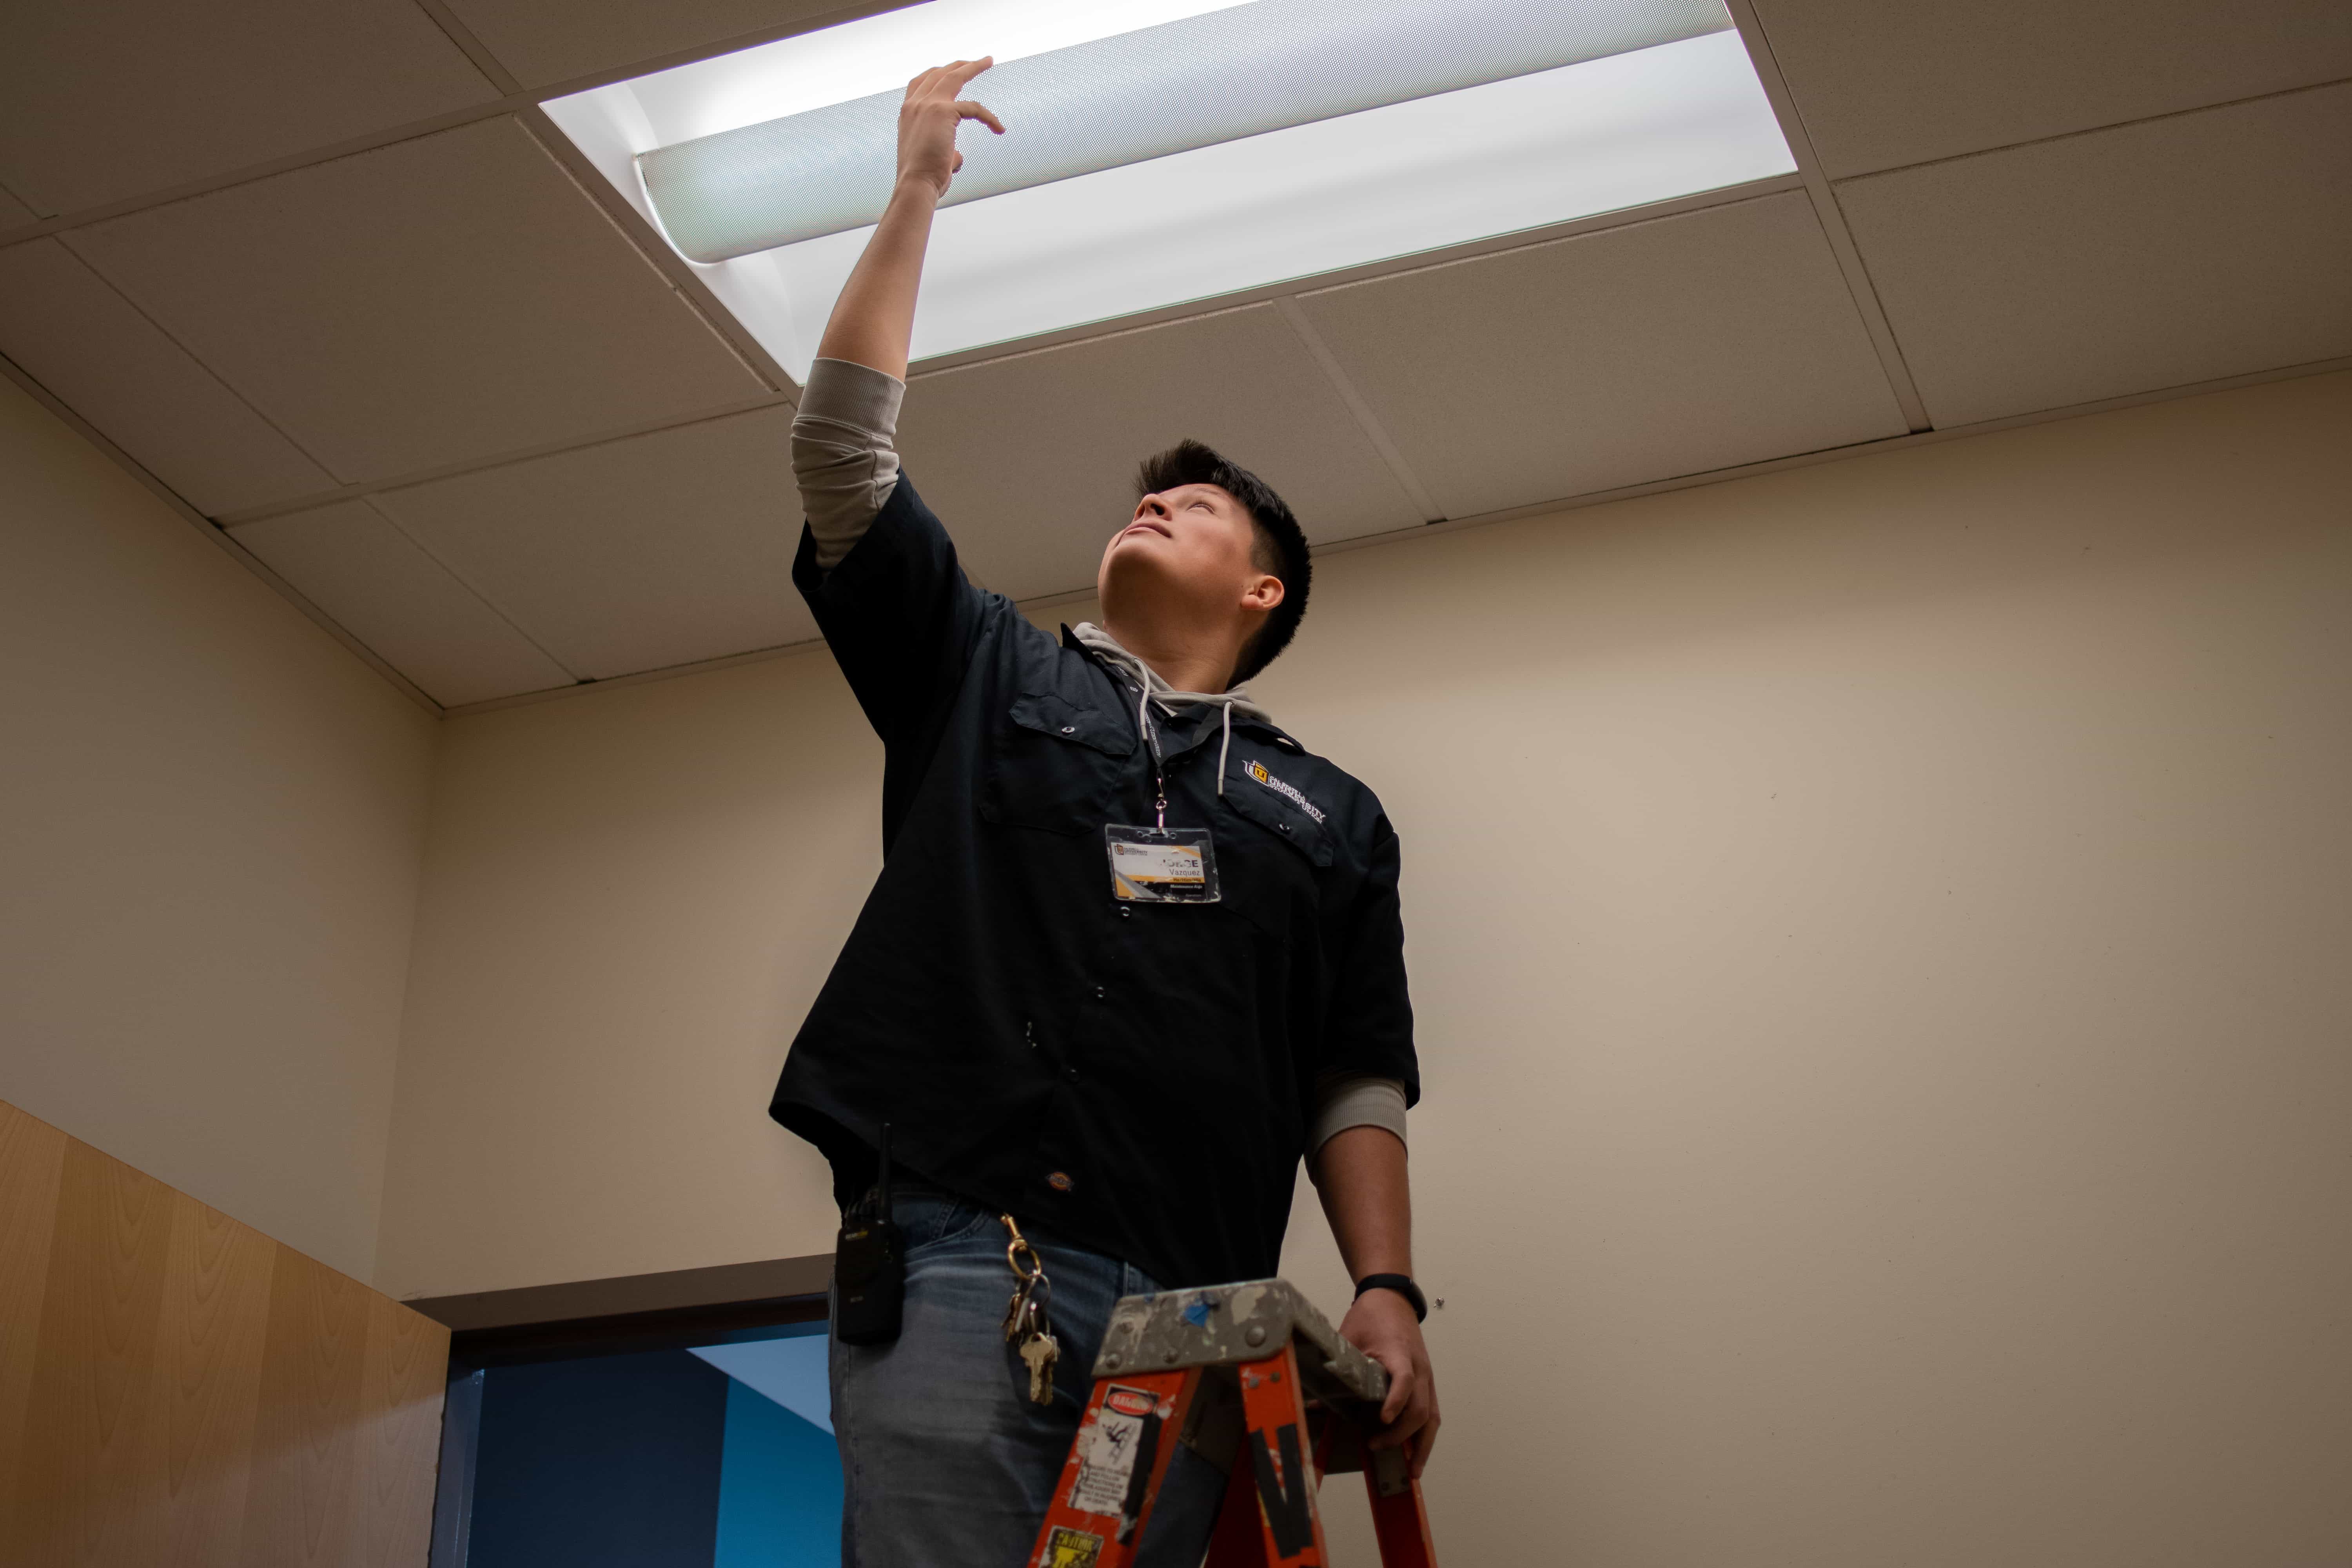 Fixing the ceiling light